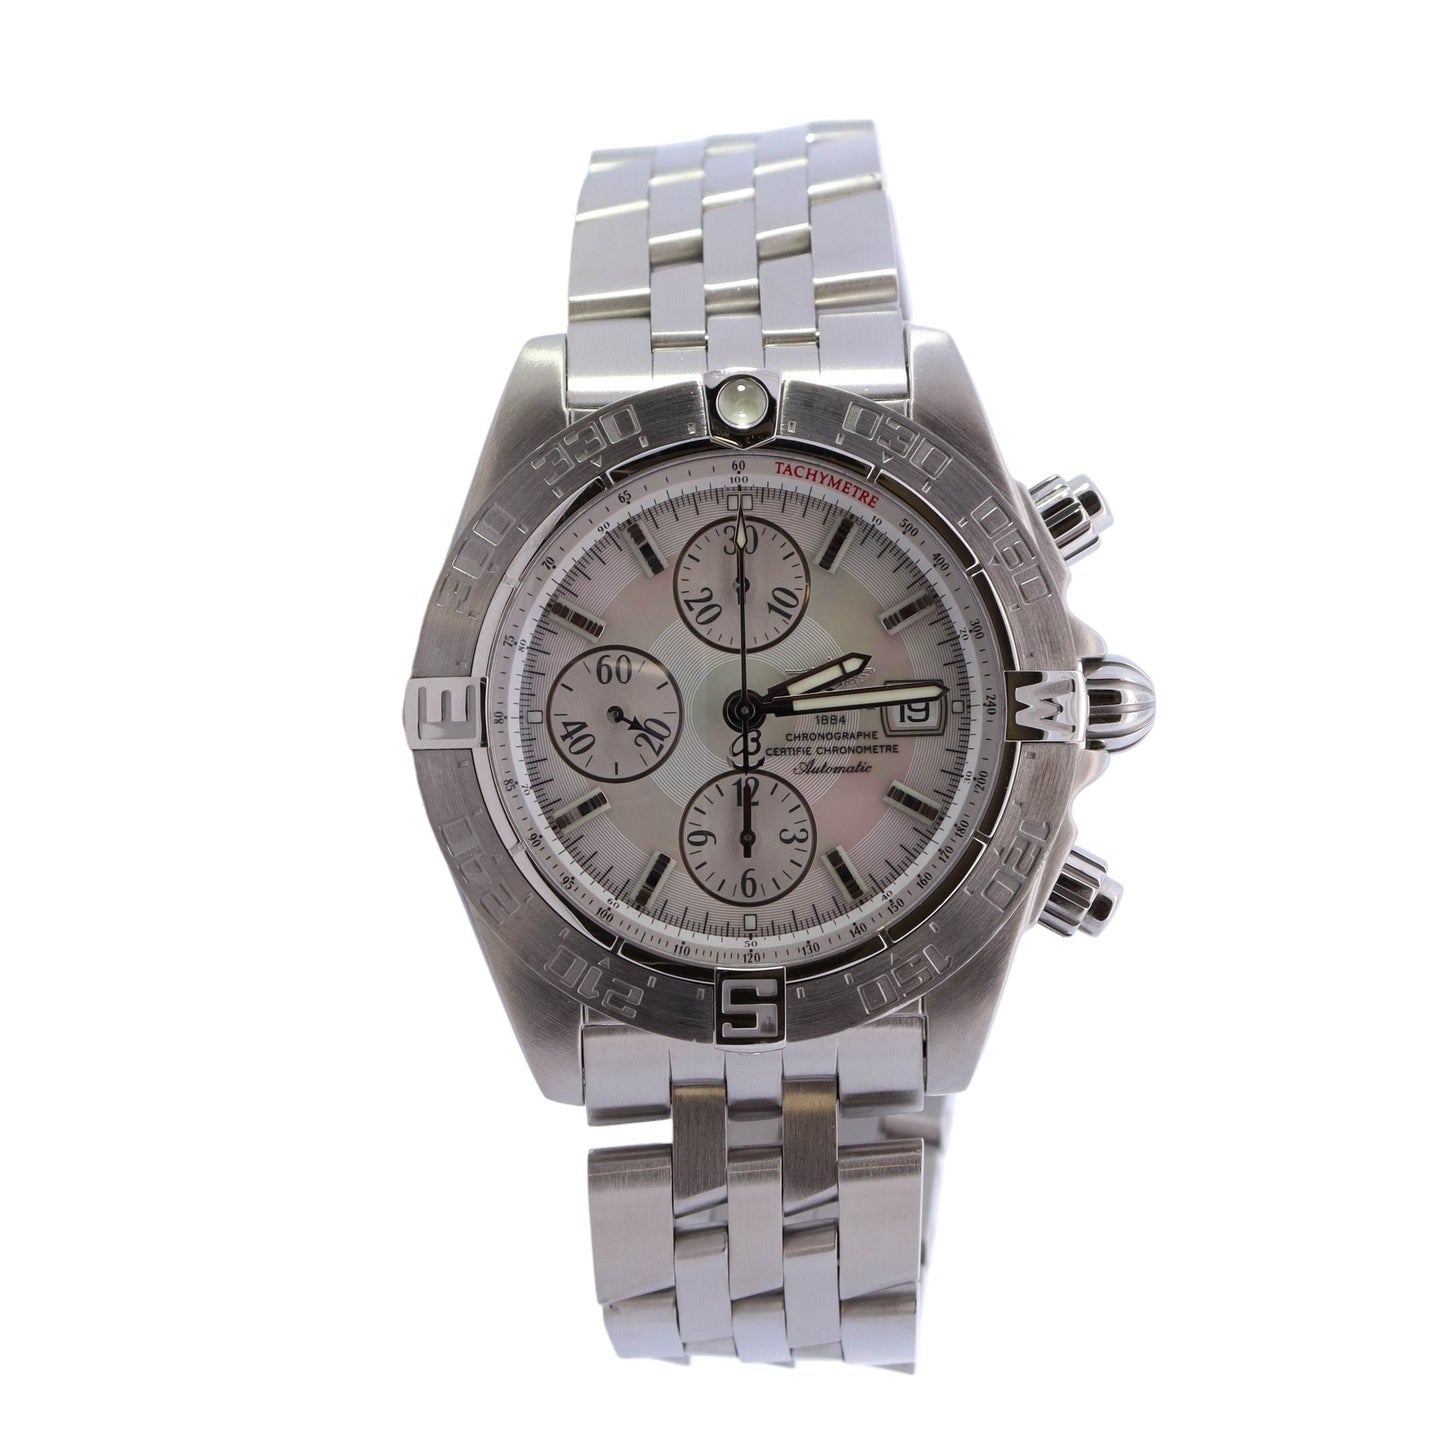 Breitling Galatic Stainless Steel 44mm MOP Chronograph Dial Watch Reference# A13364